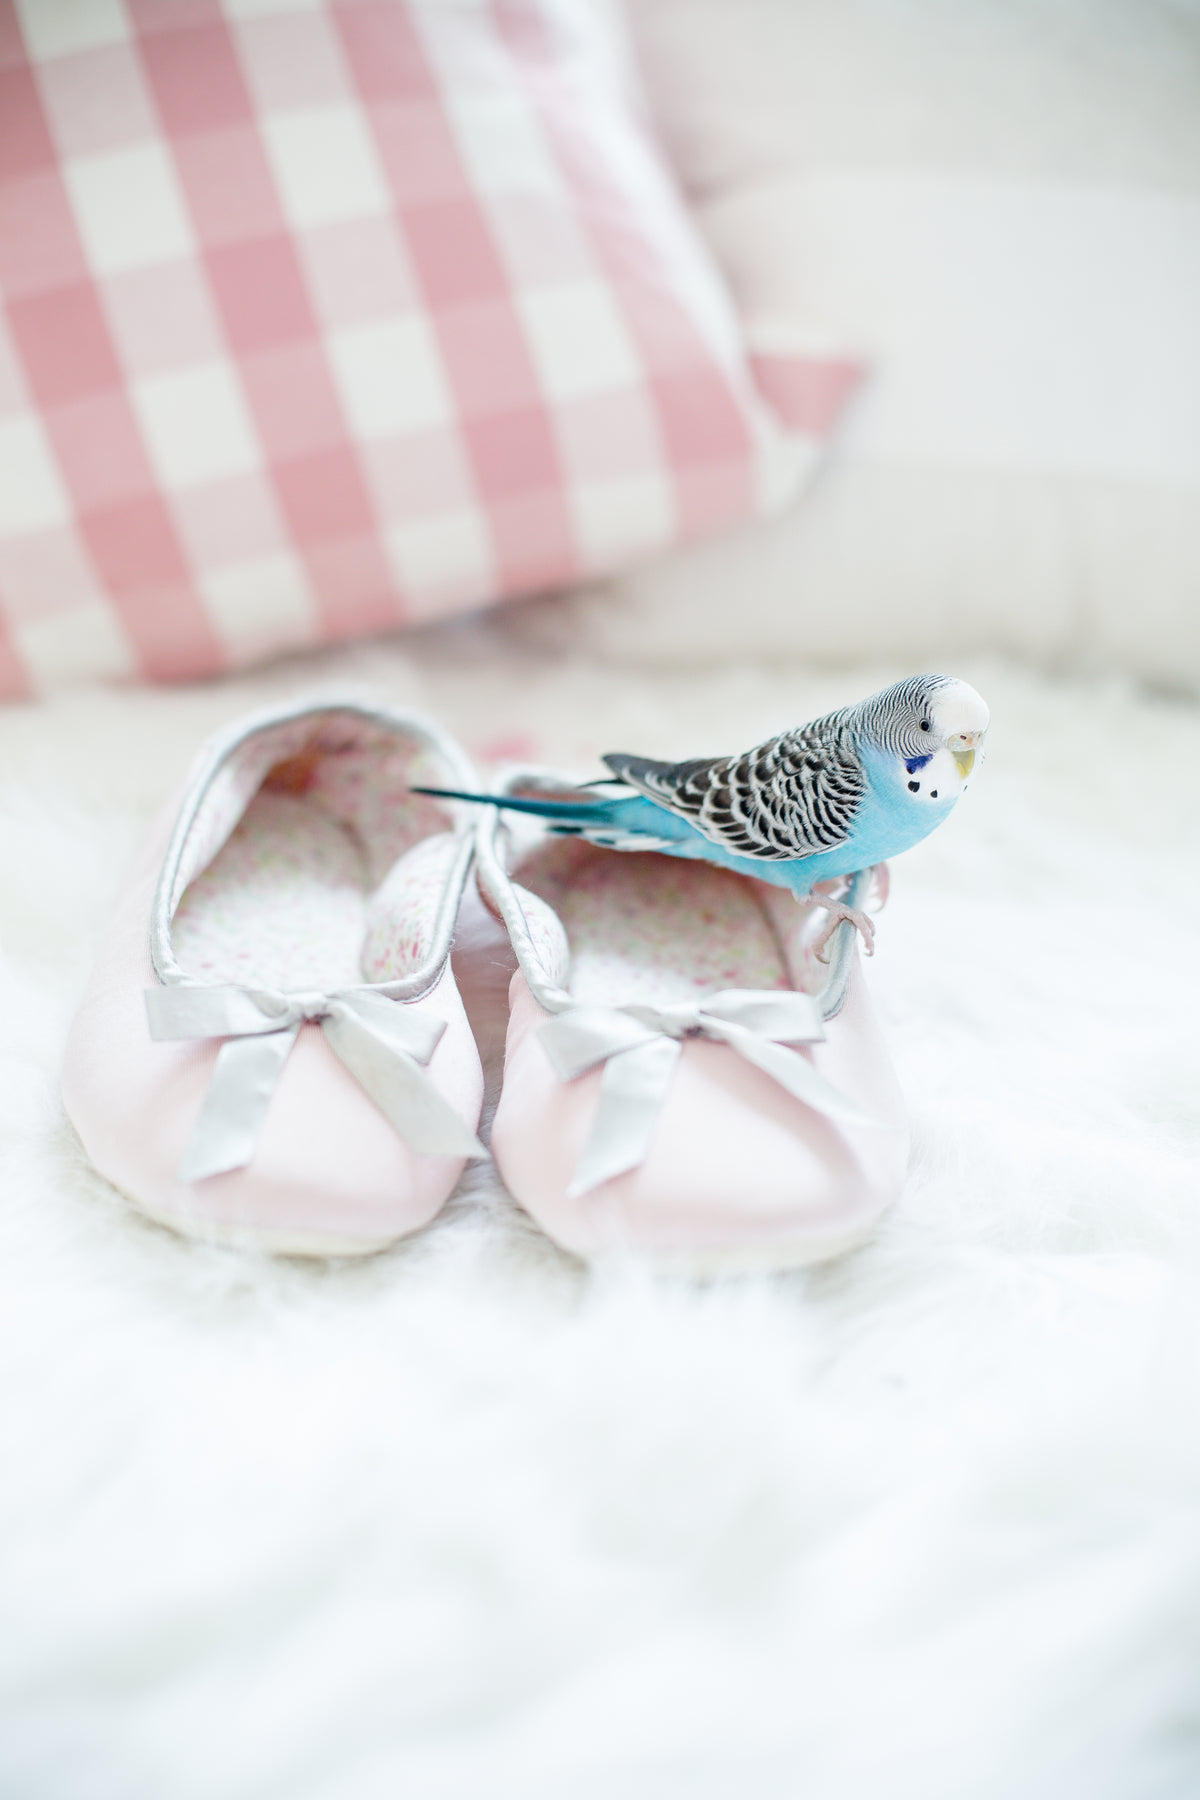 a parakeet sitting on shoes